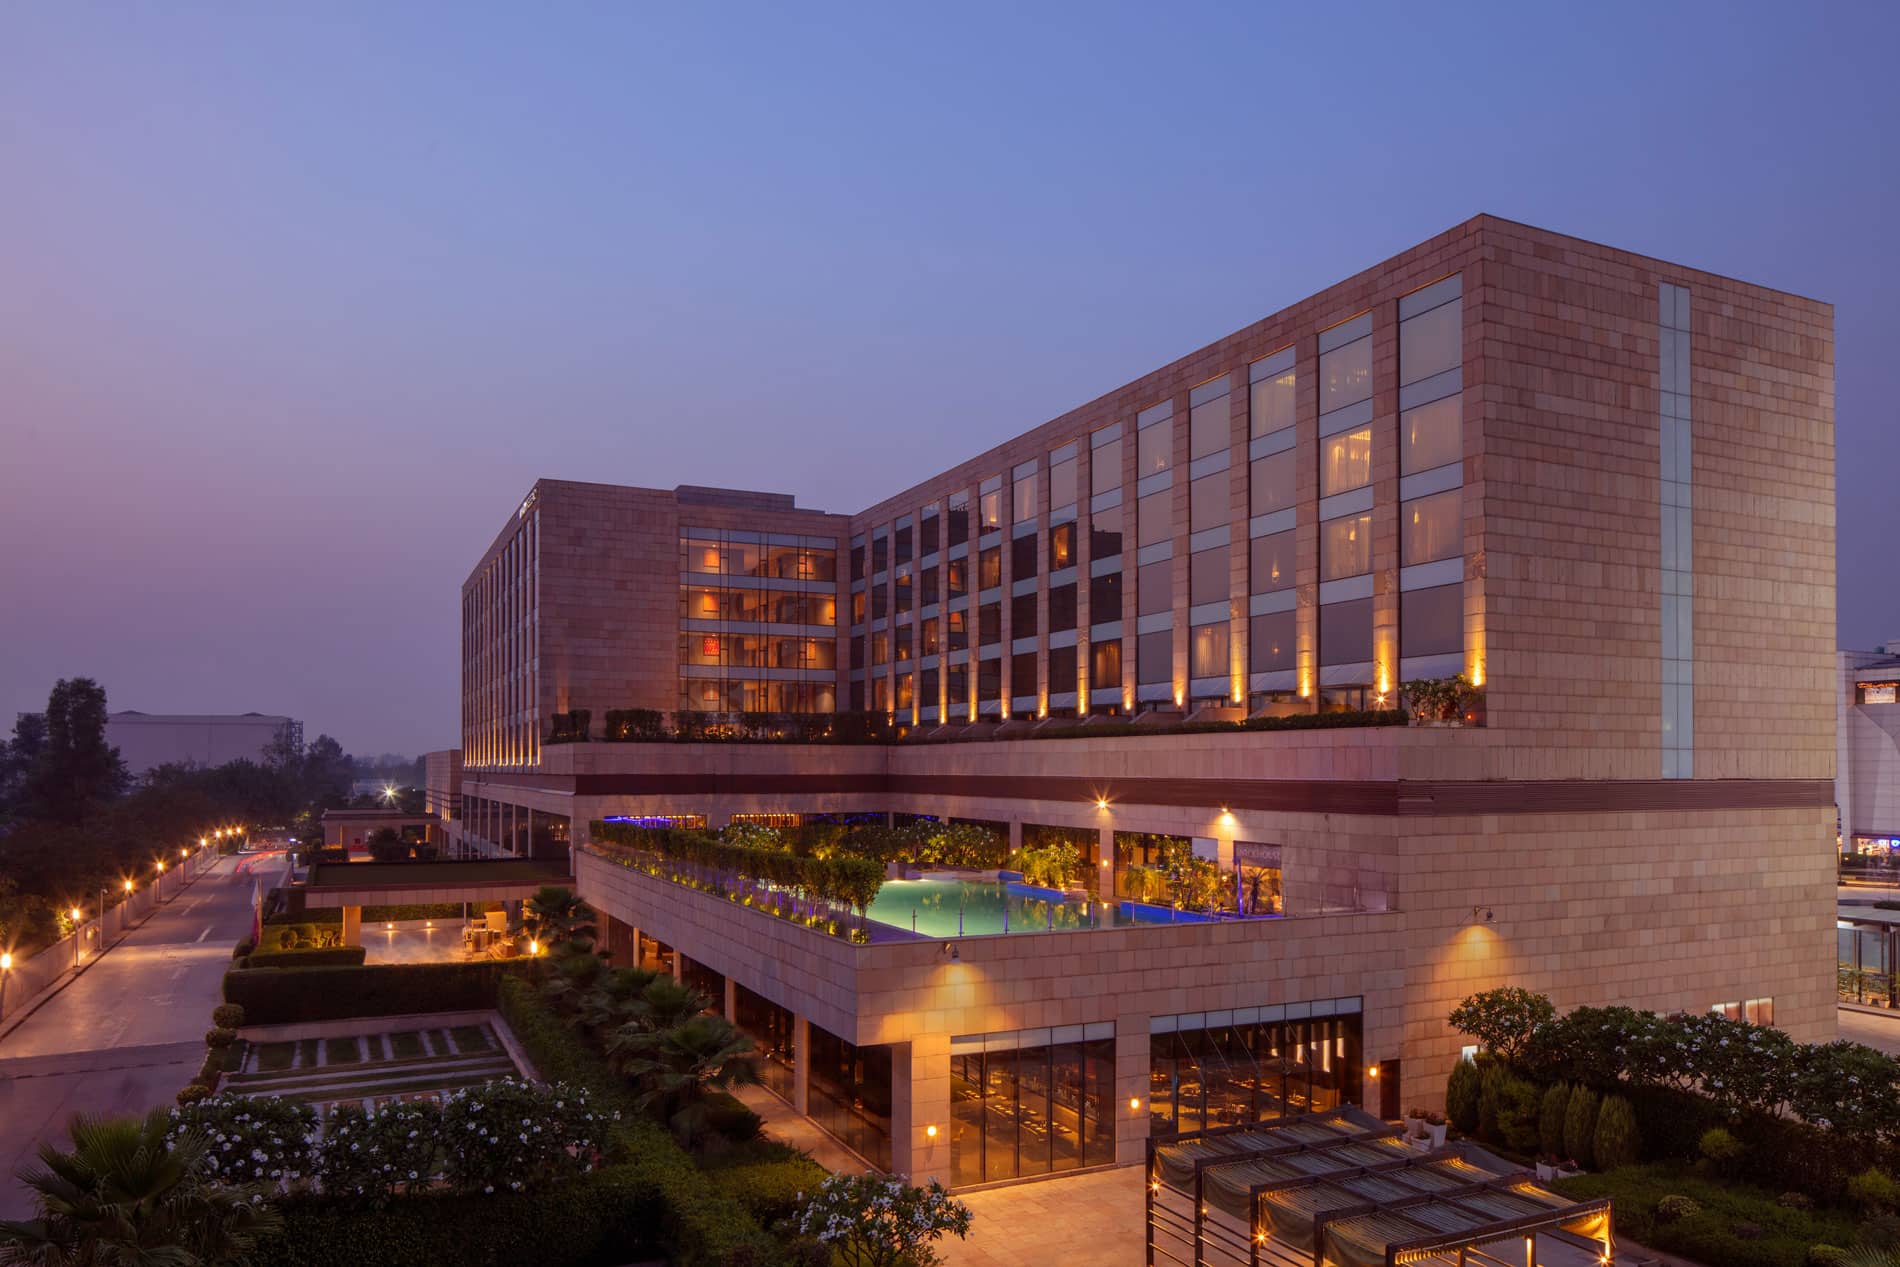 Exterior Hotel Photography at Hyatt Regency Chandigarh, India. Gerry O'Leary